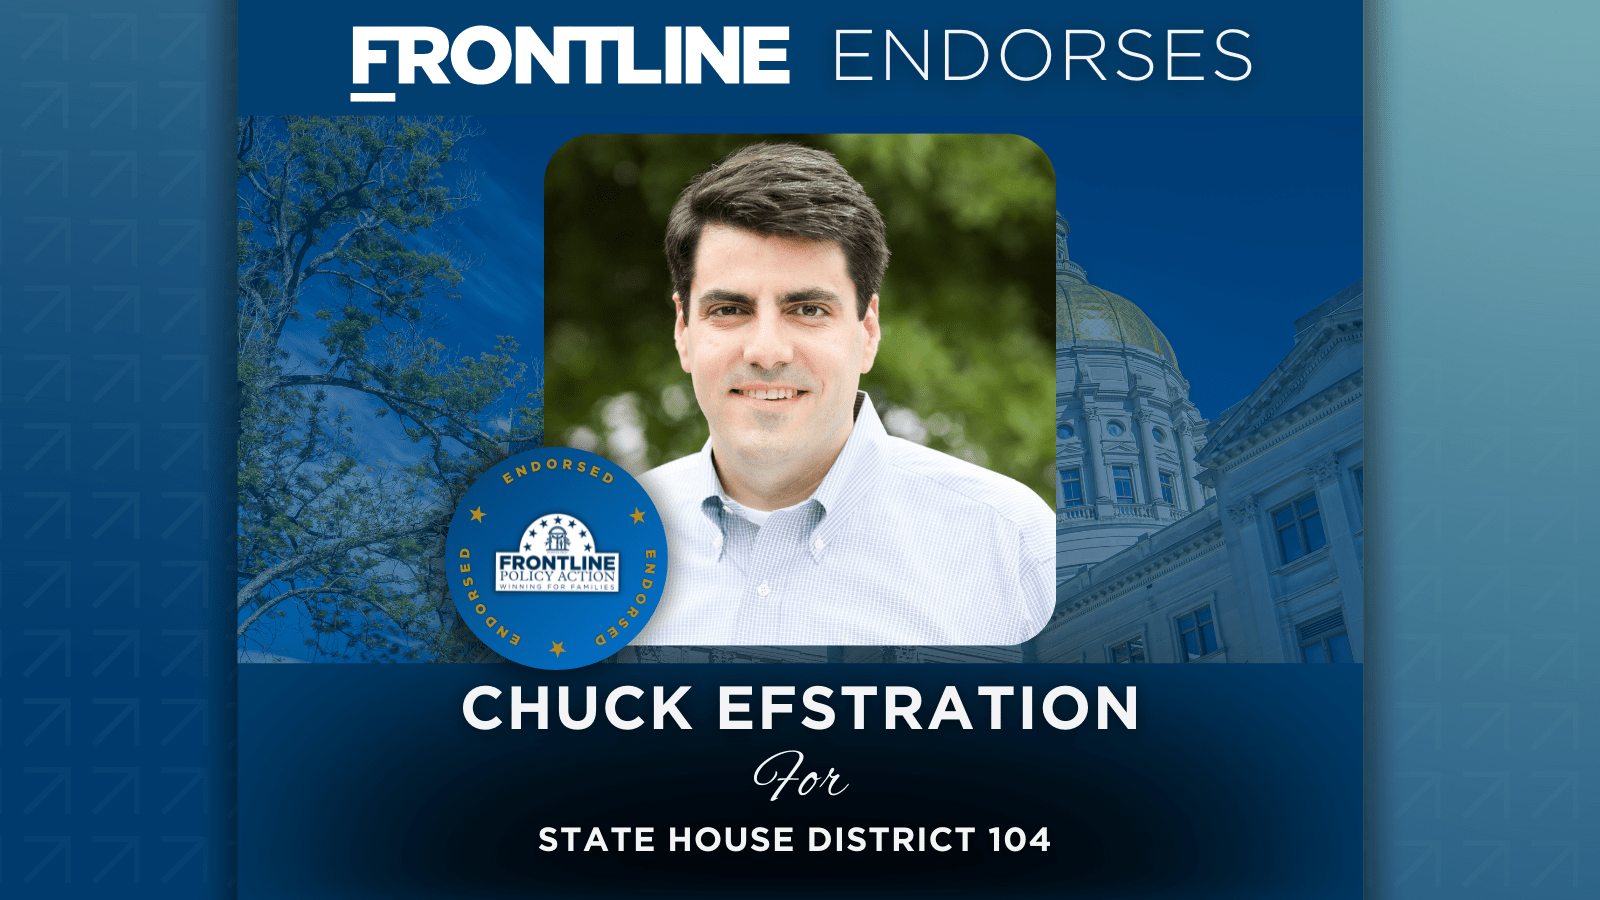 BREAKING: Frontline Endorses Chuck Efstration for State House District 104